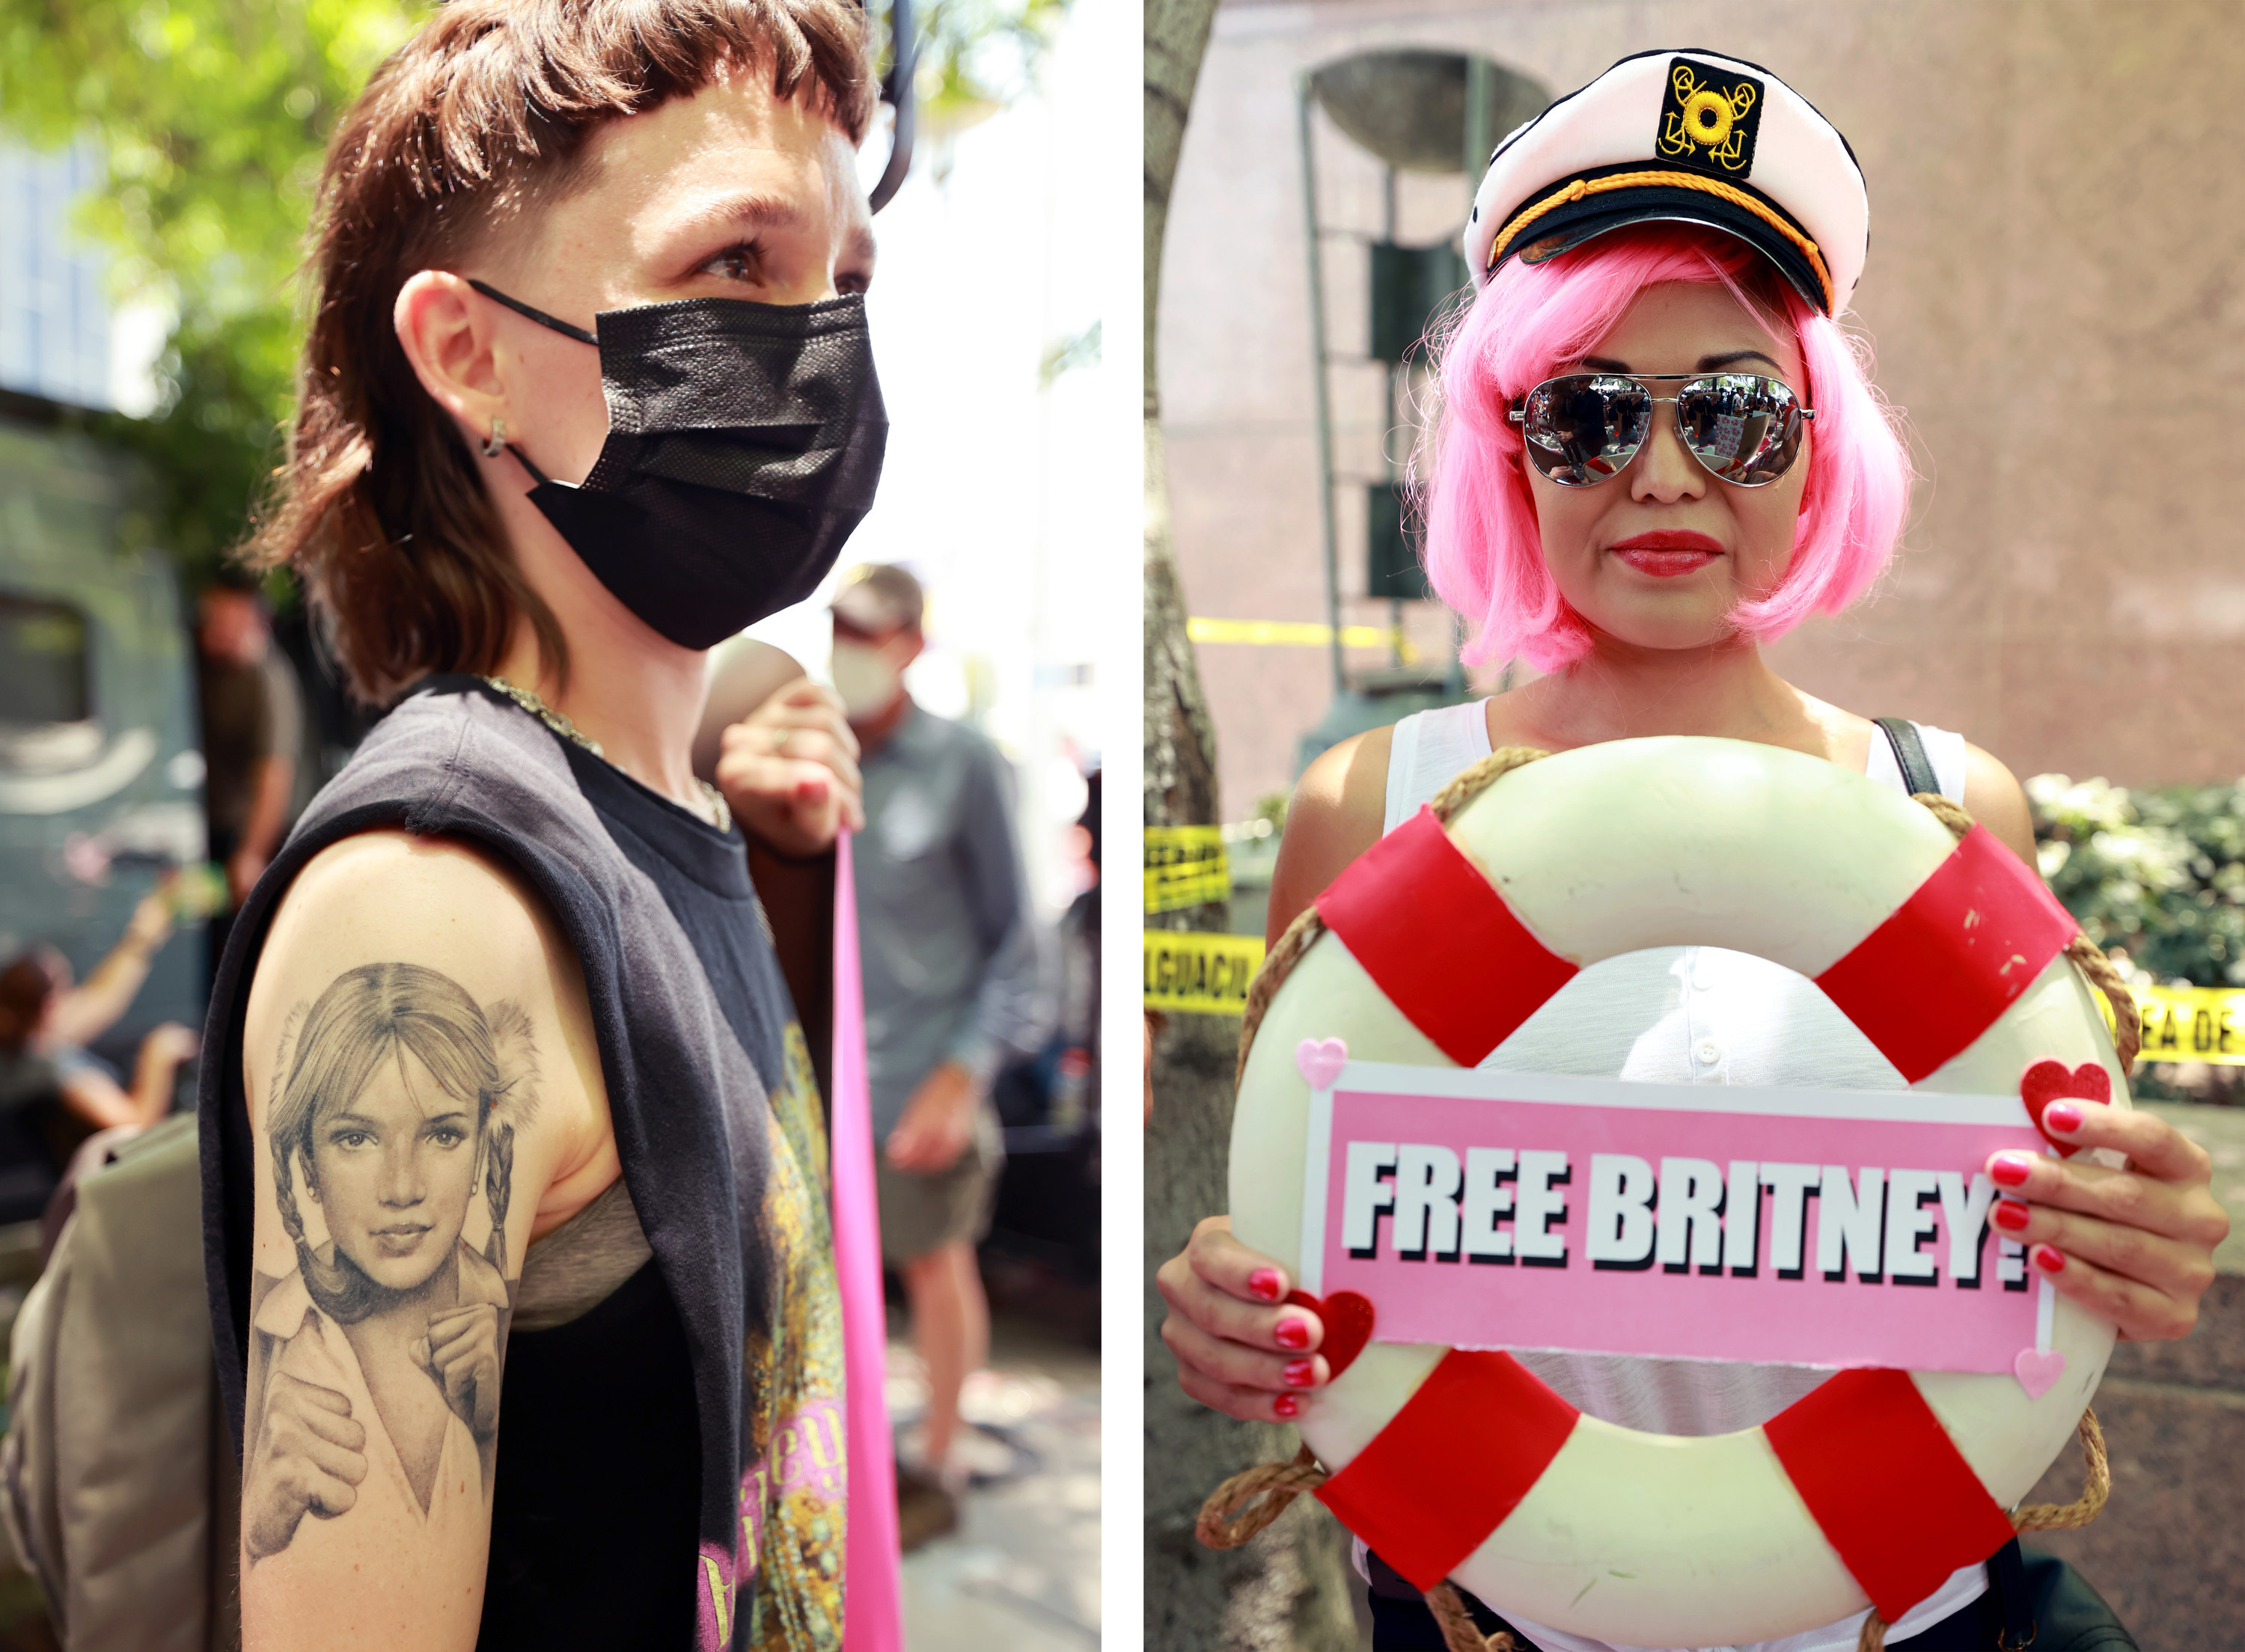 Protesters show off a Britney Spears tattoo and hold a life preserver labeled &quot;Free Britney&quot;